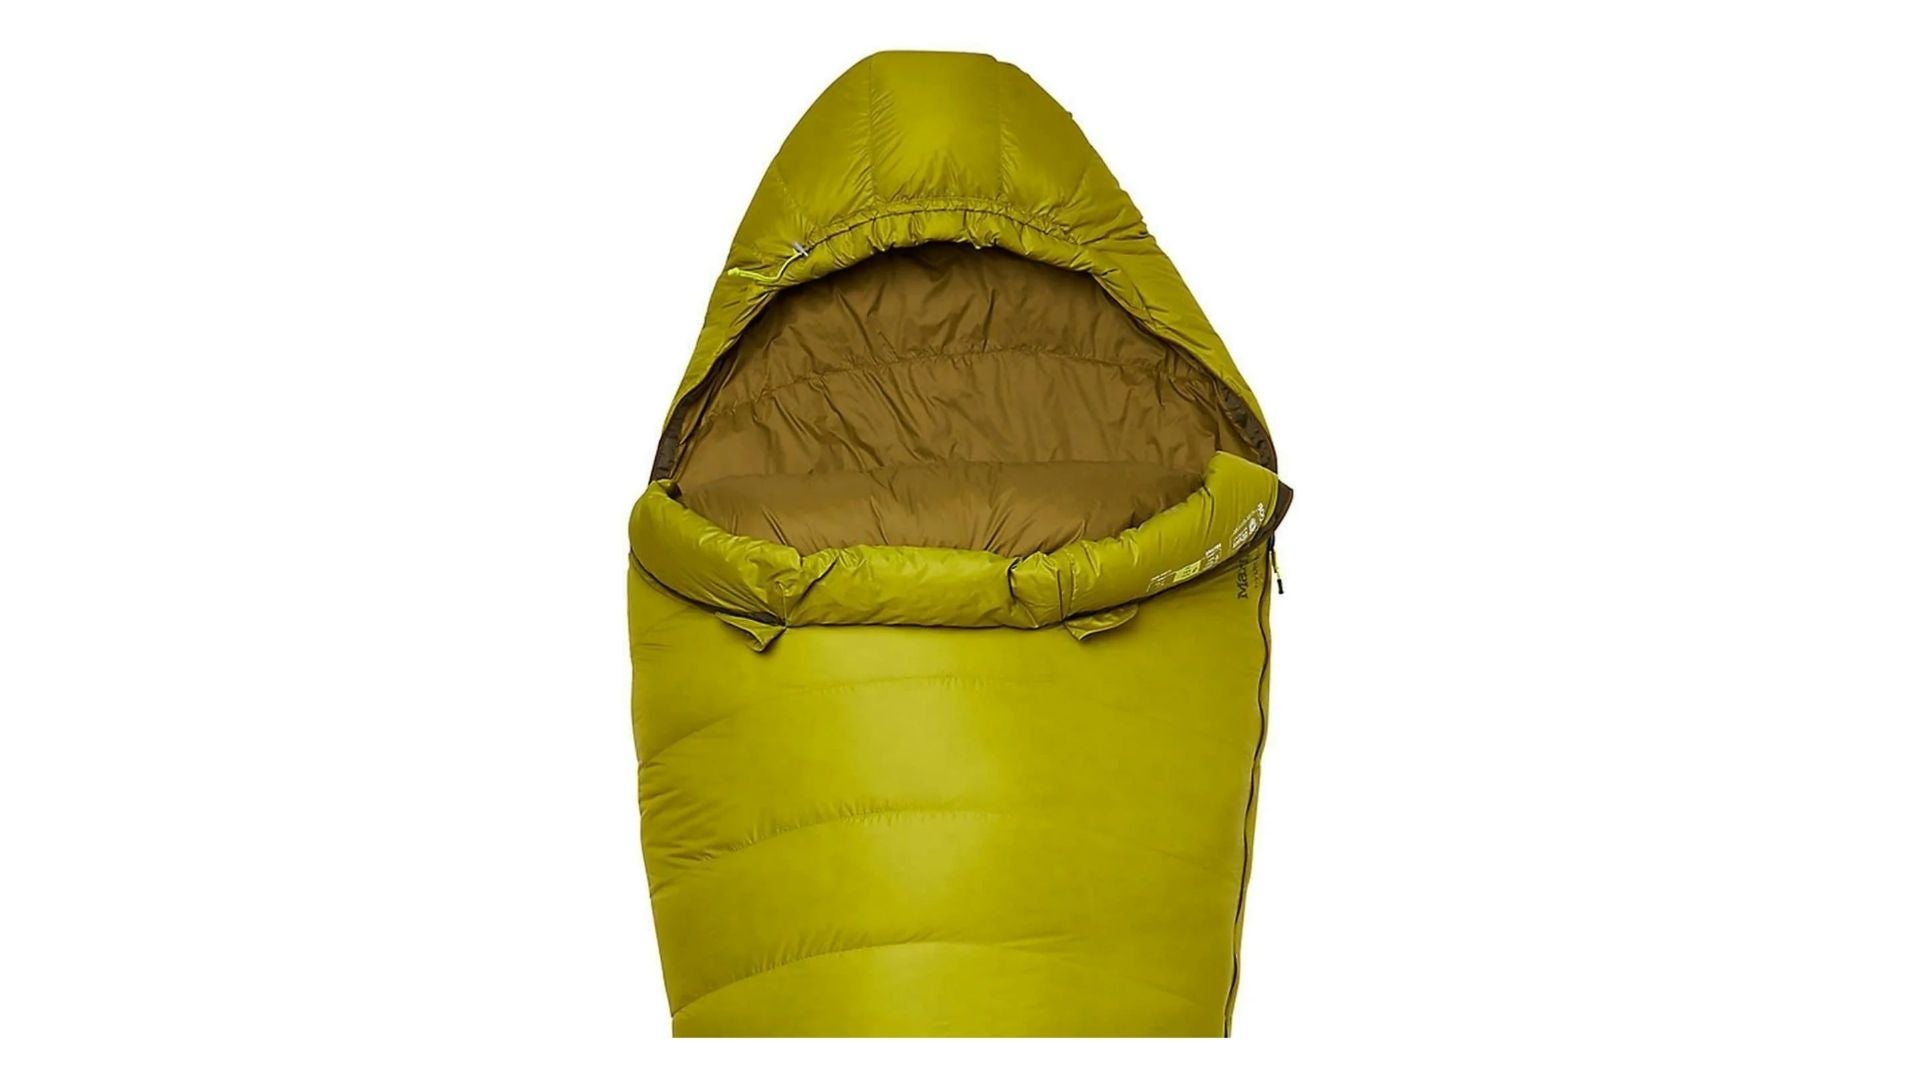 Great for Kids Gold Armour Sleeping Bag for Indoor and Outdoor Use Camping Backpacking Adults Teens Girls Ultralight and Compact Bags for Sleepover Boys